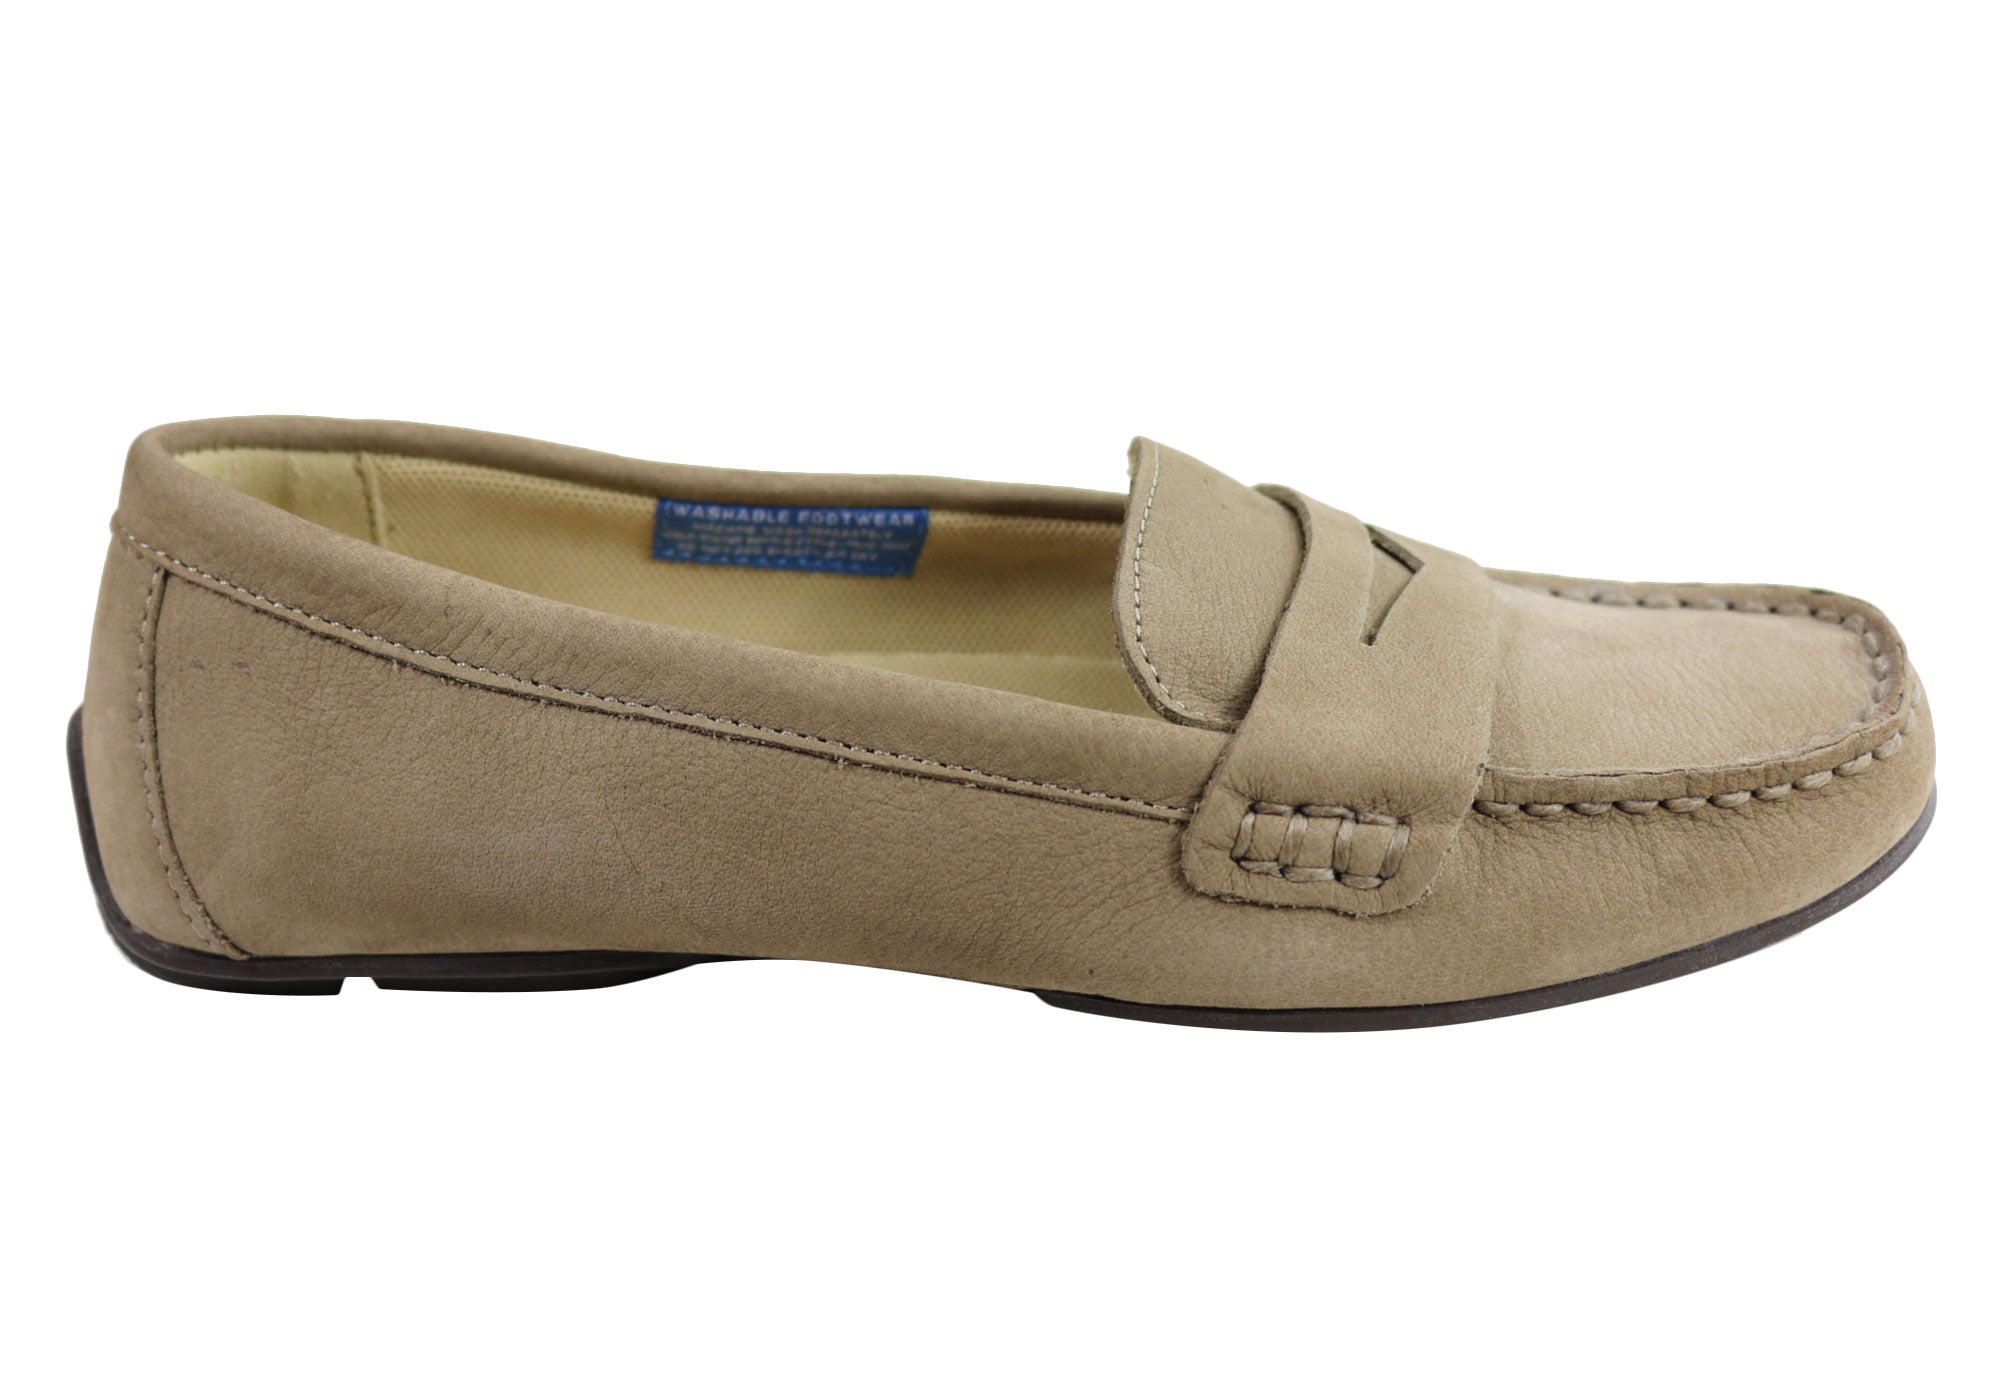 Rockport SBII Loafer II Womens Comfortable Leather Loafers Shoes ...